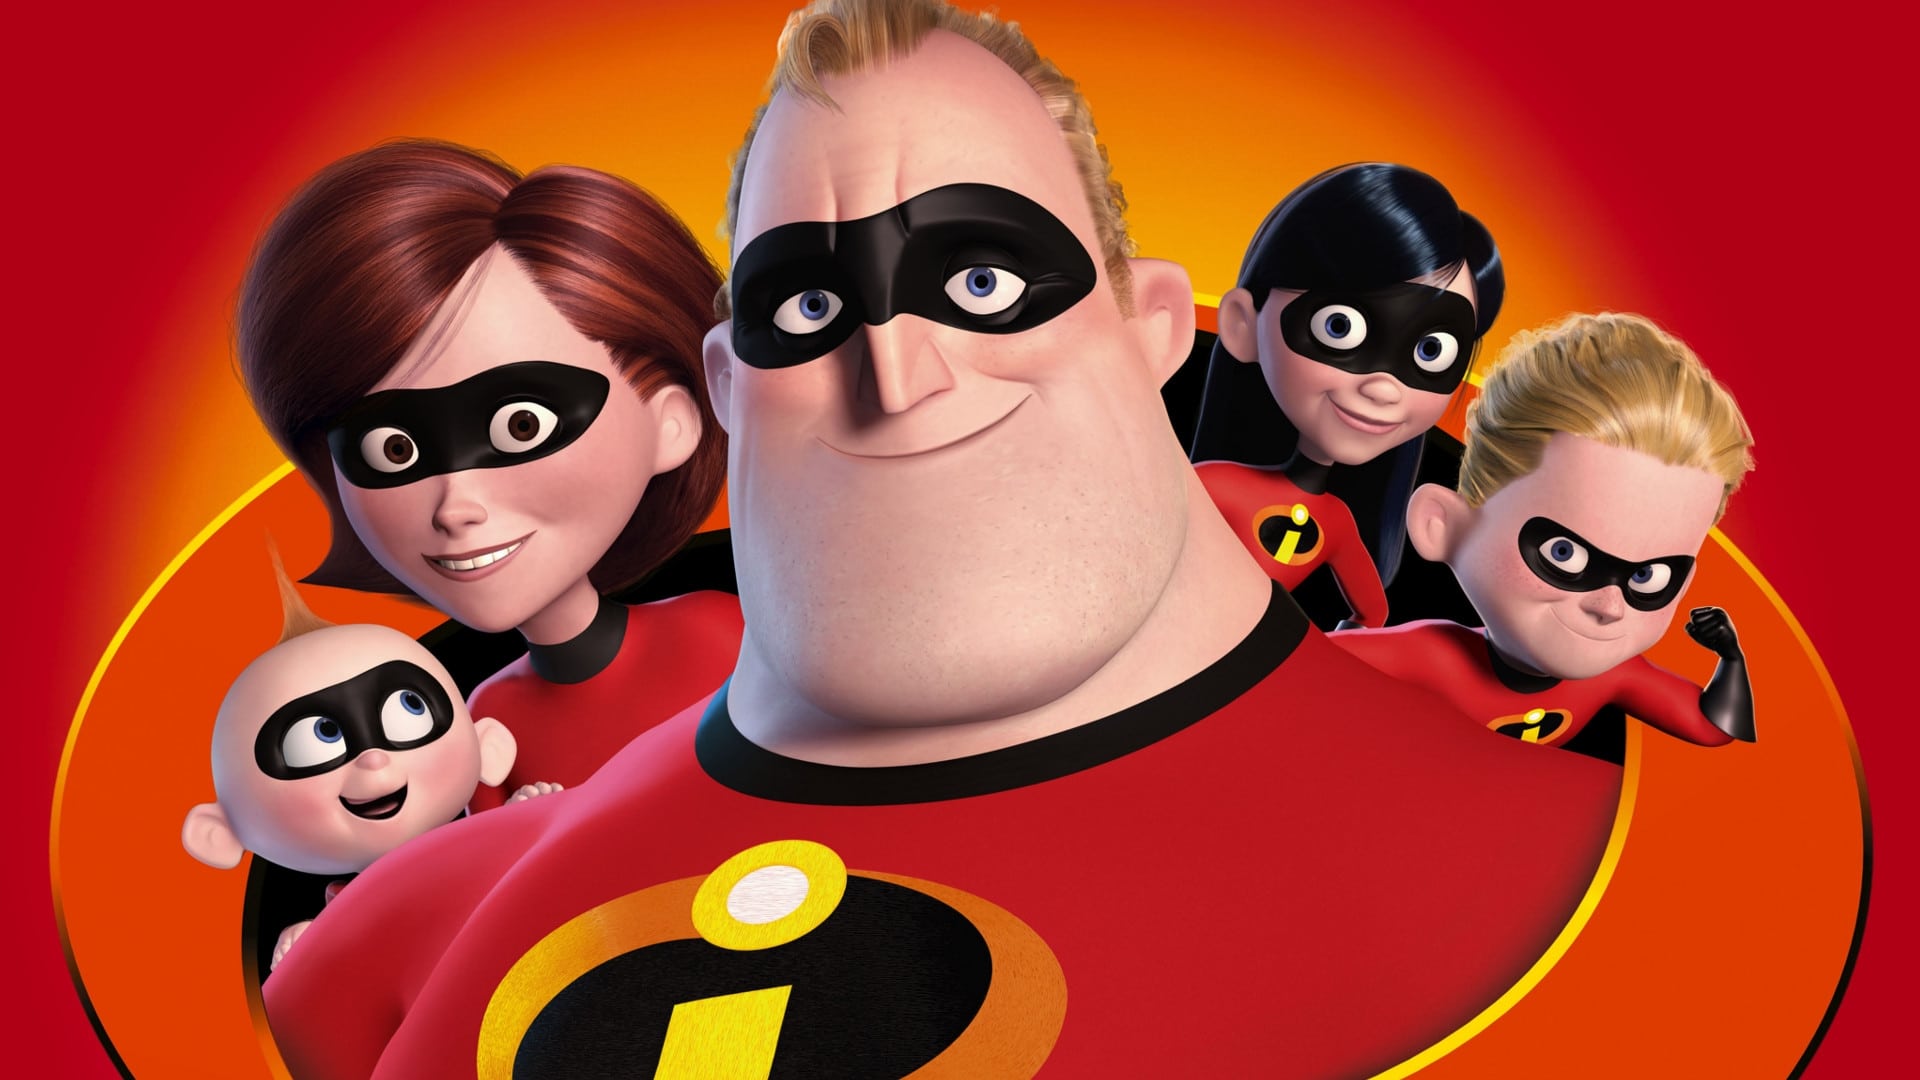 The Incredibles.